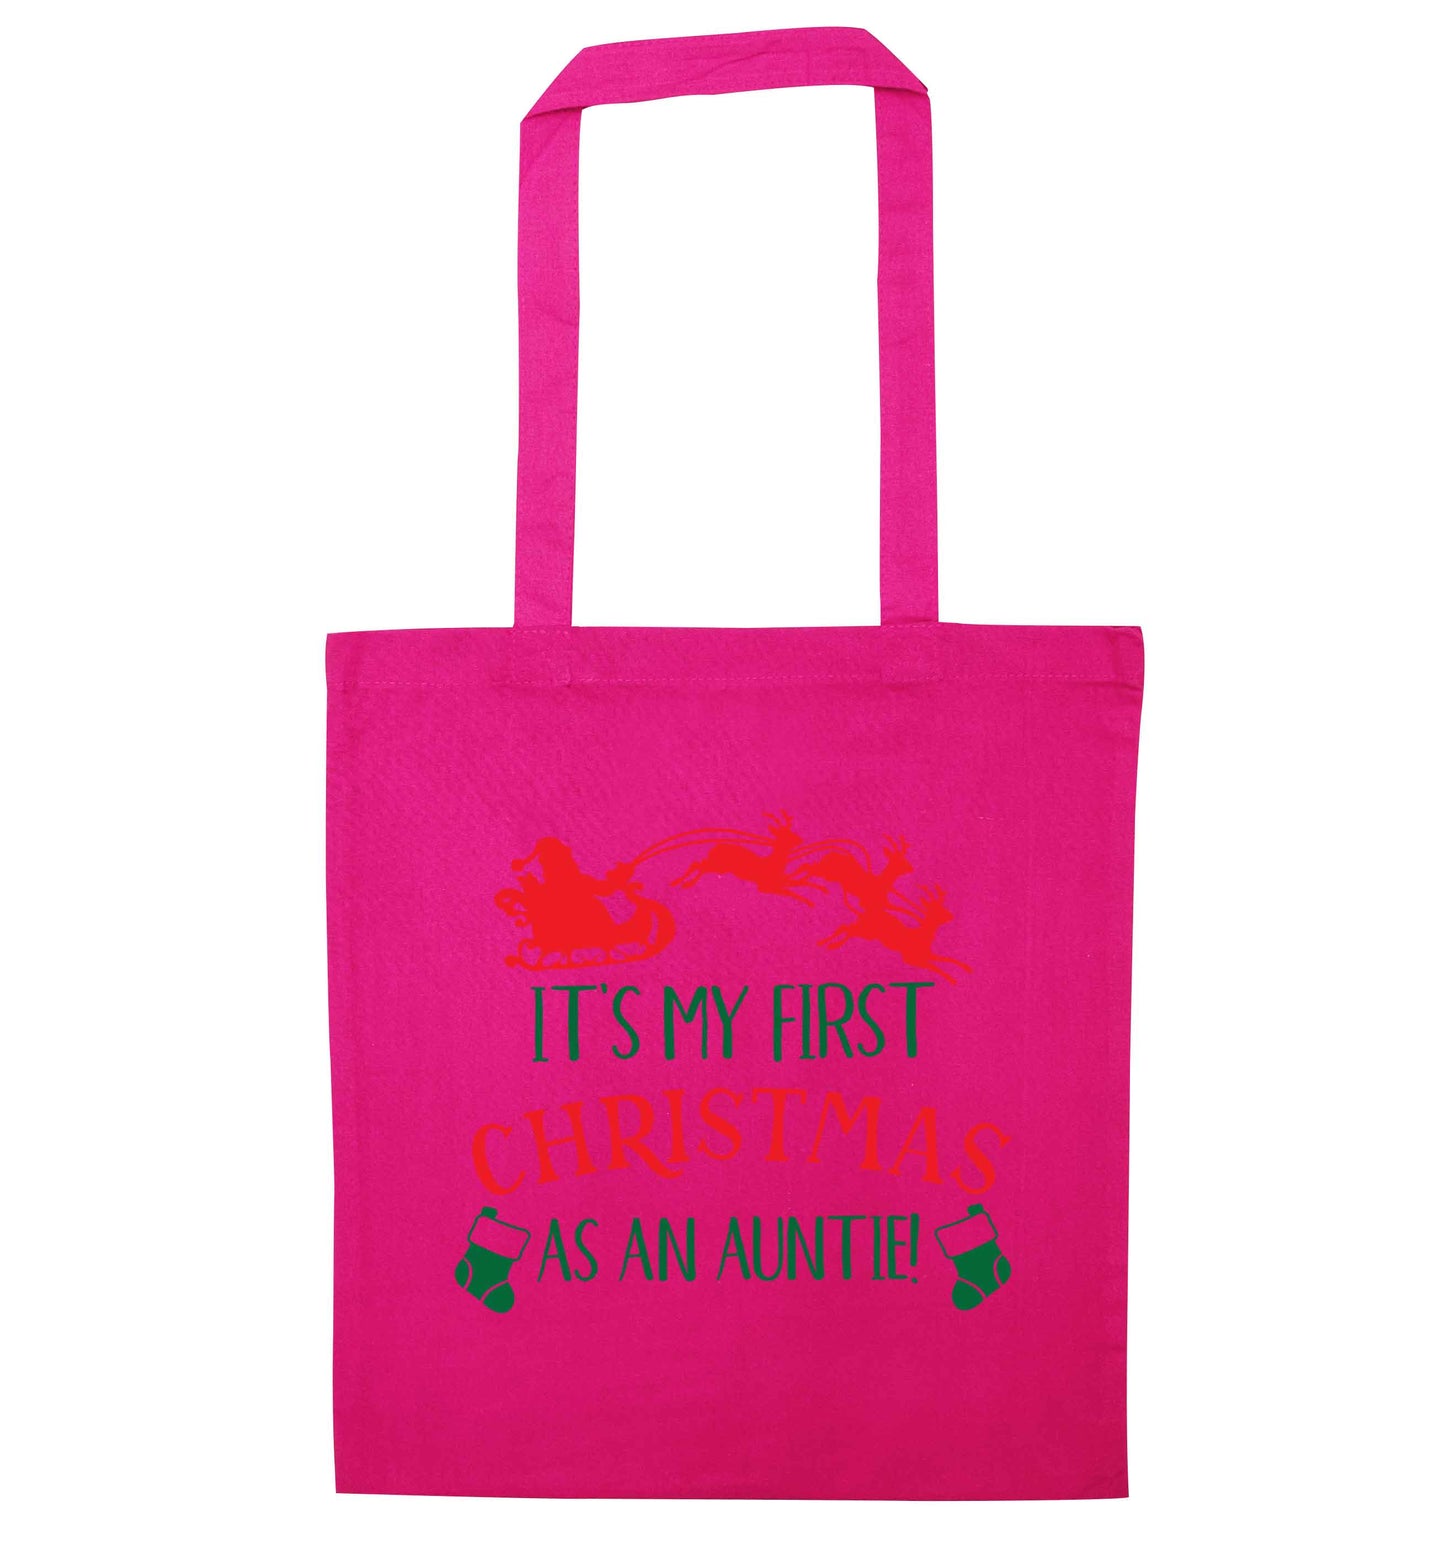 It's my first Christmas as an auntie! pink tote bag